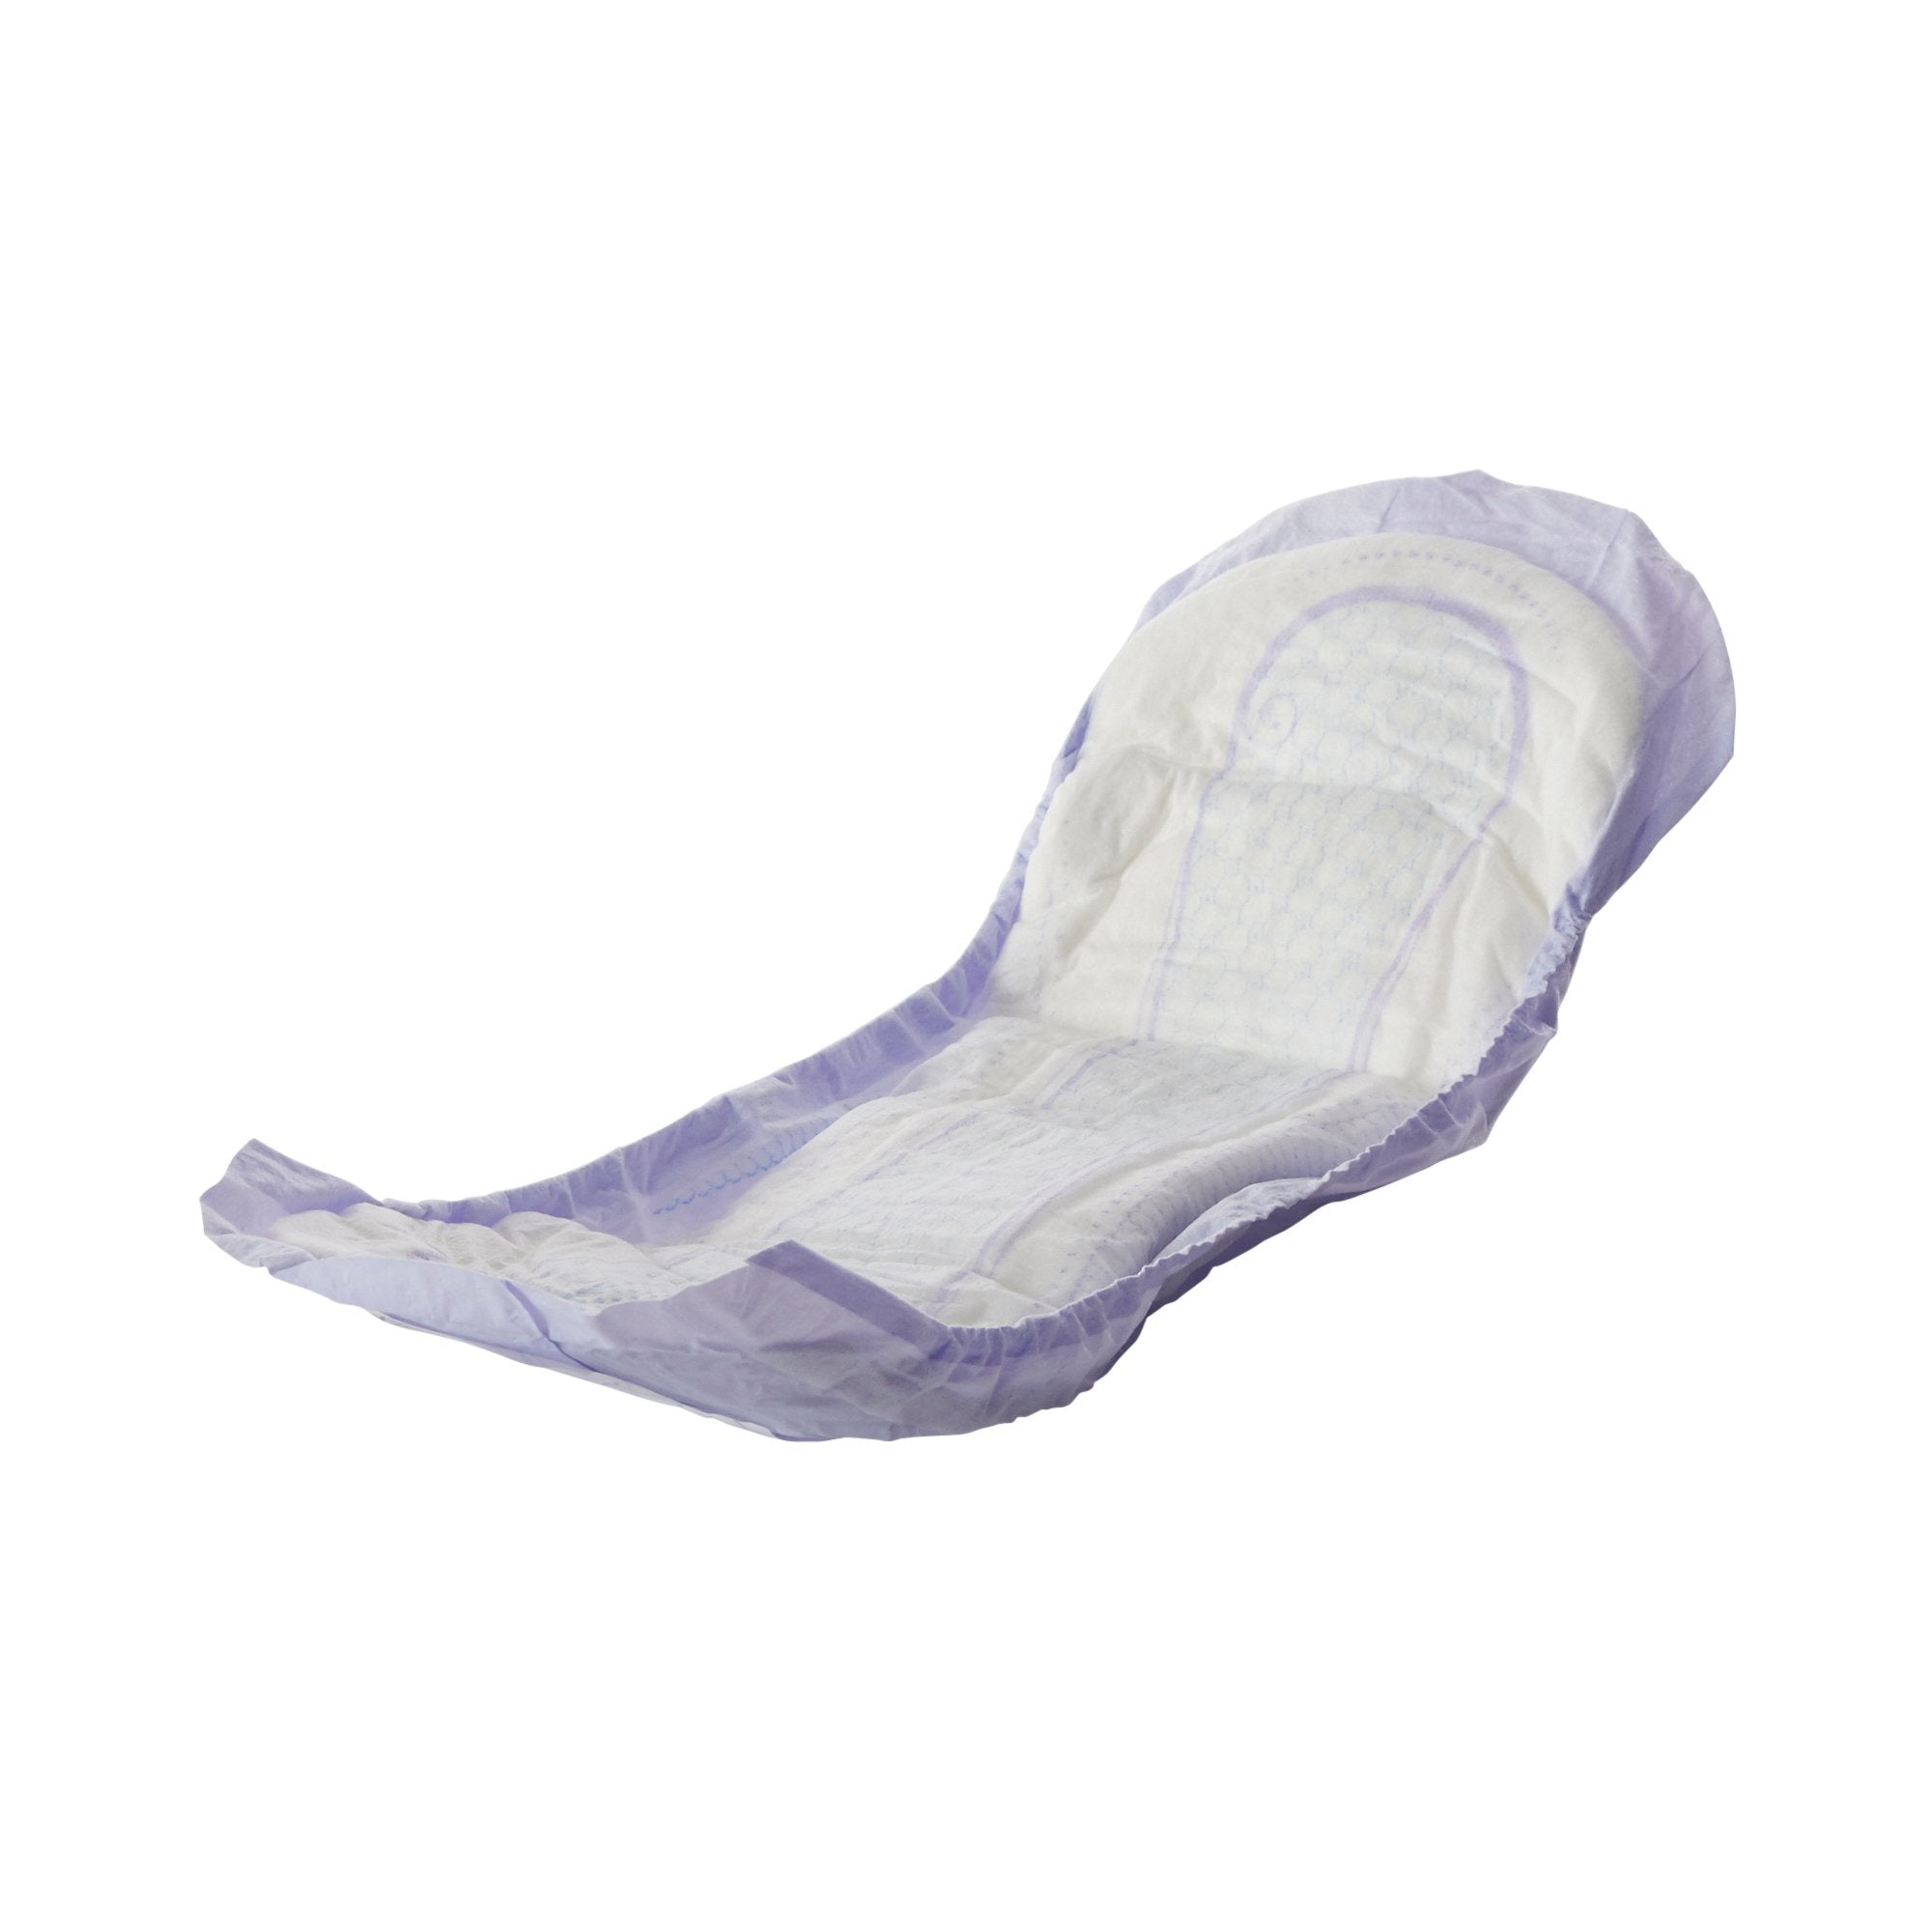 Poise Pads Ultimate Absorbency 33592